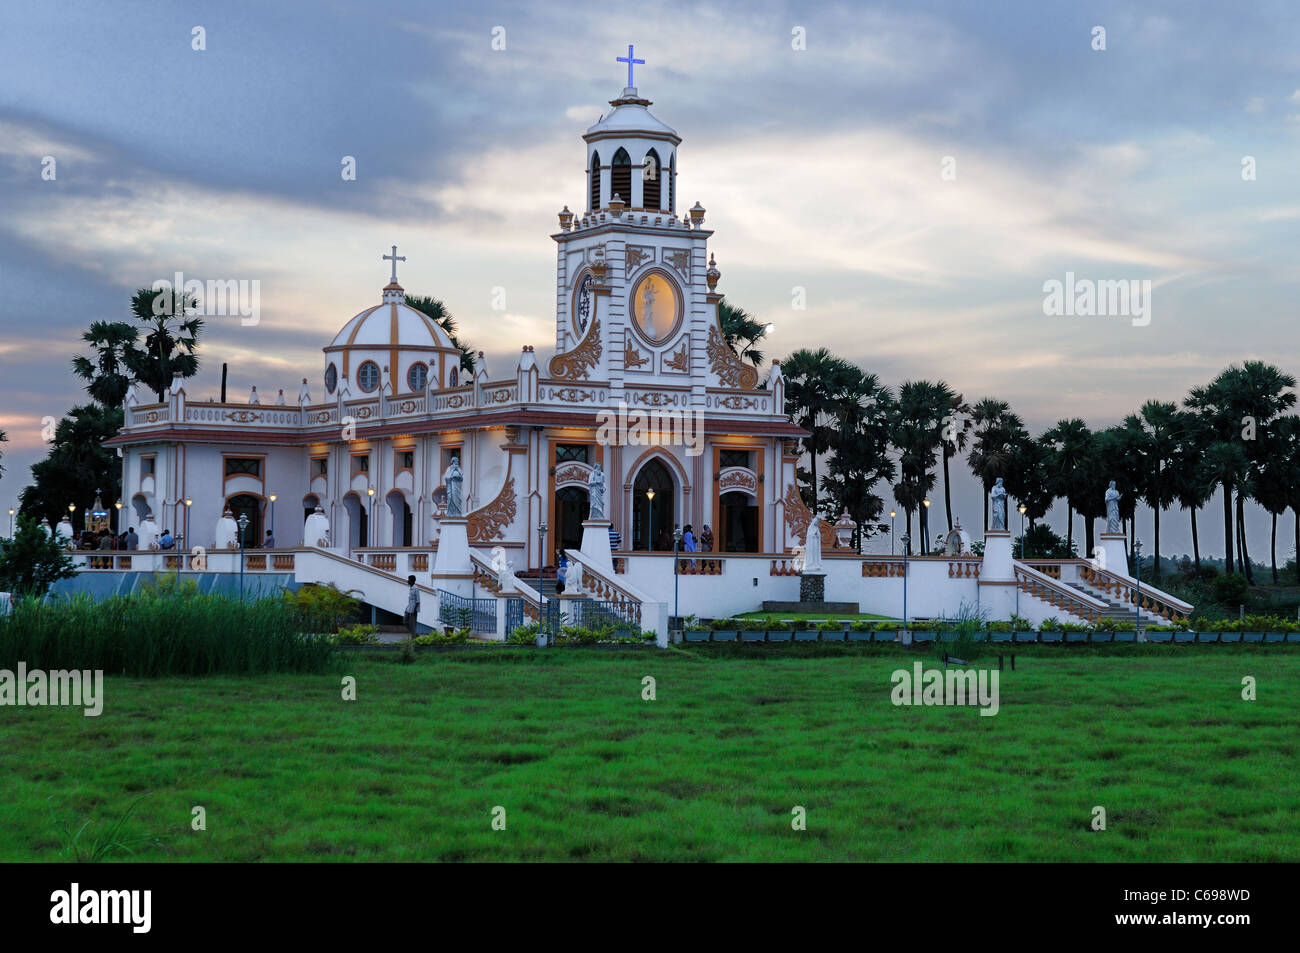 Intricate architecture at a local church in Pondicherry India Stock Photo